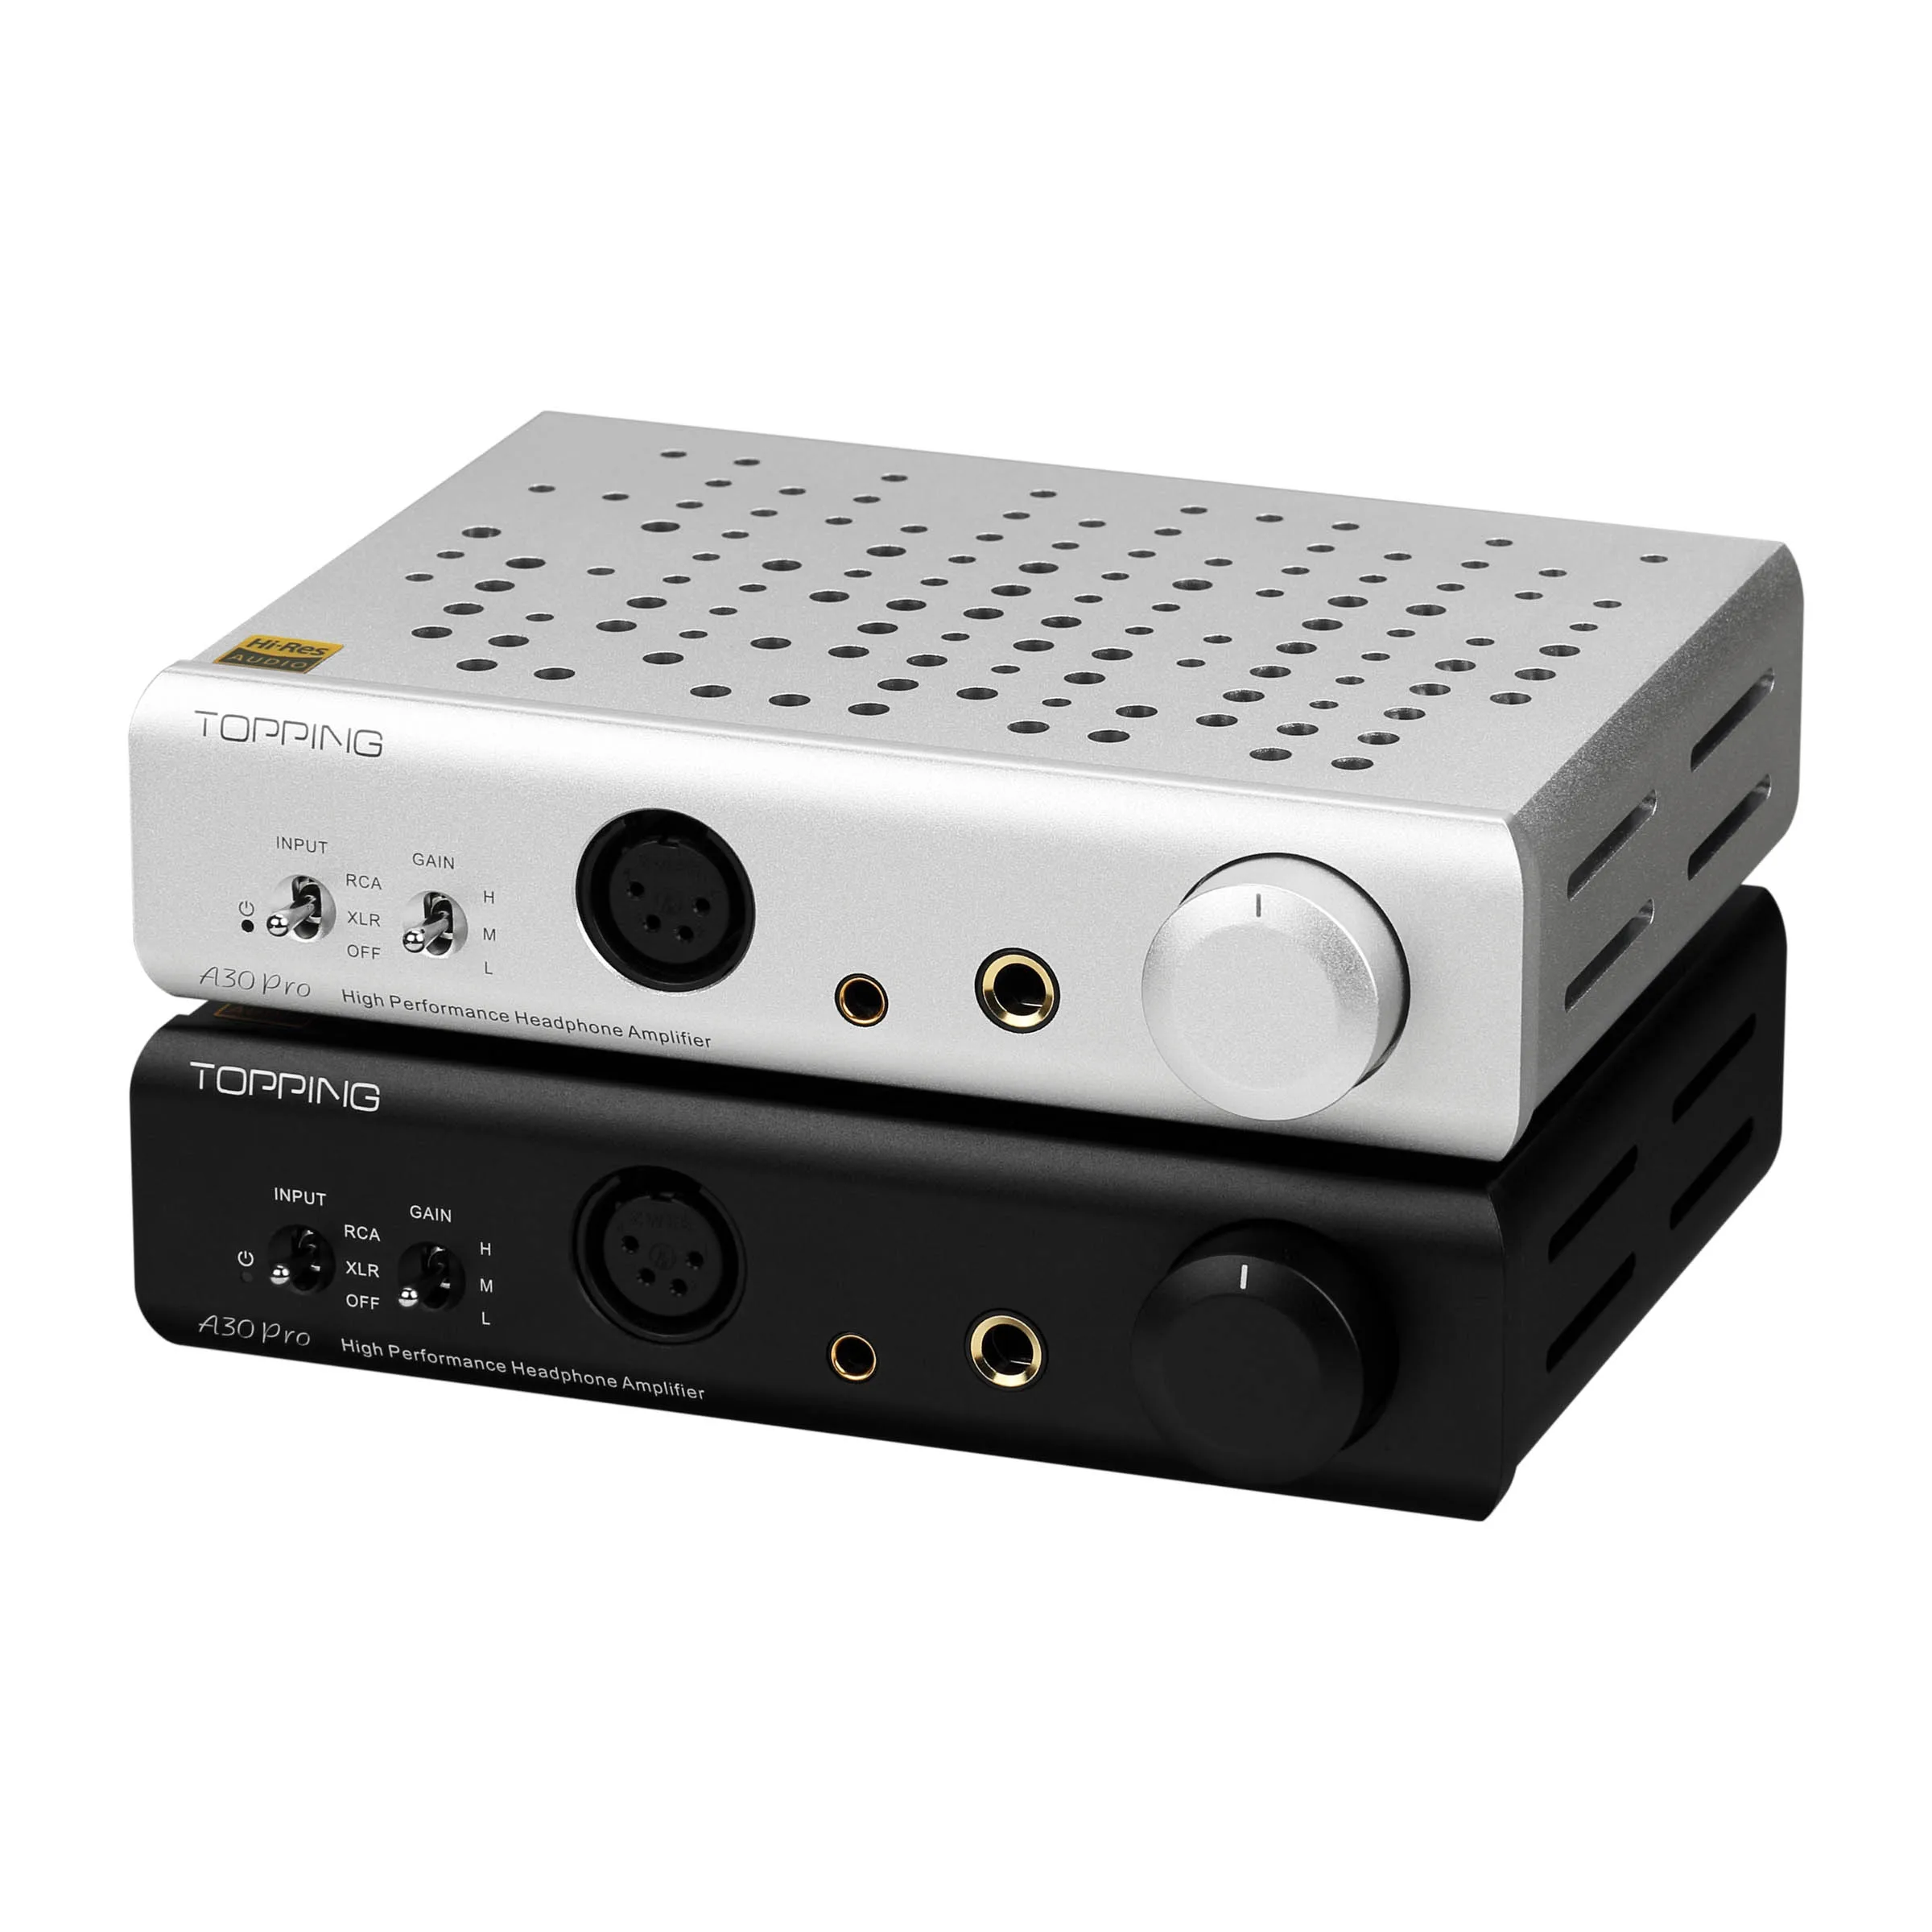 

TOPPING A30pro Incredible Power NFCA Hi-Res Audio 3 step gain settings Headphone Amplifier